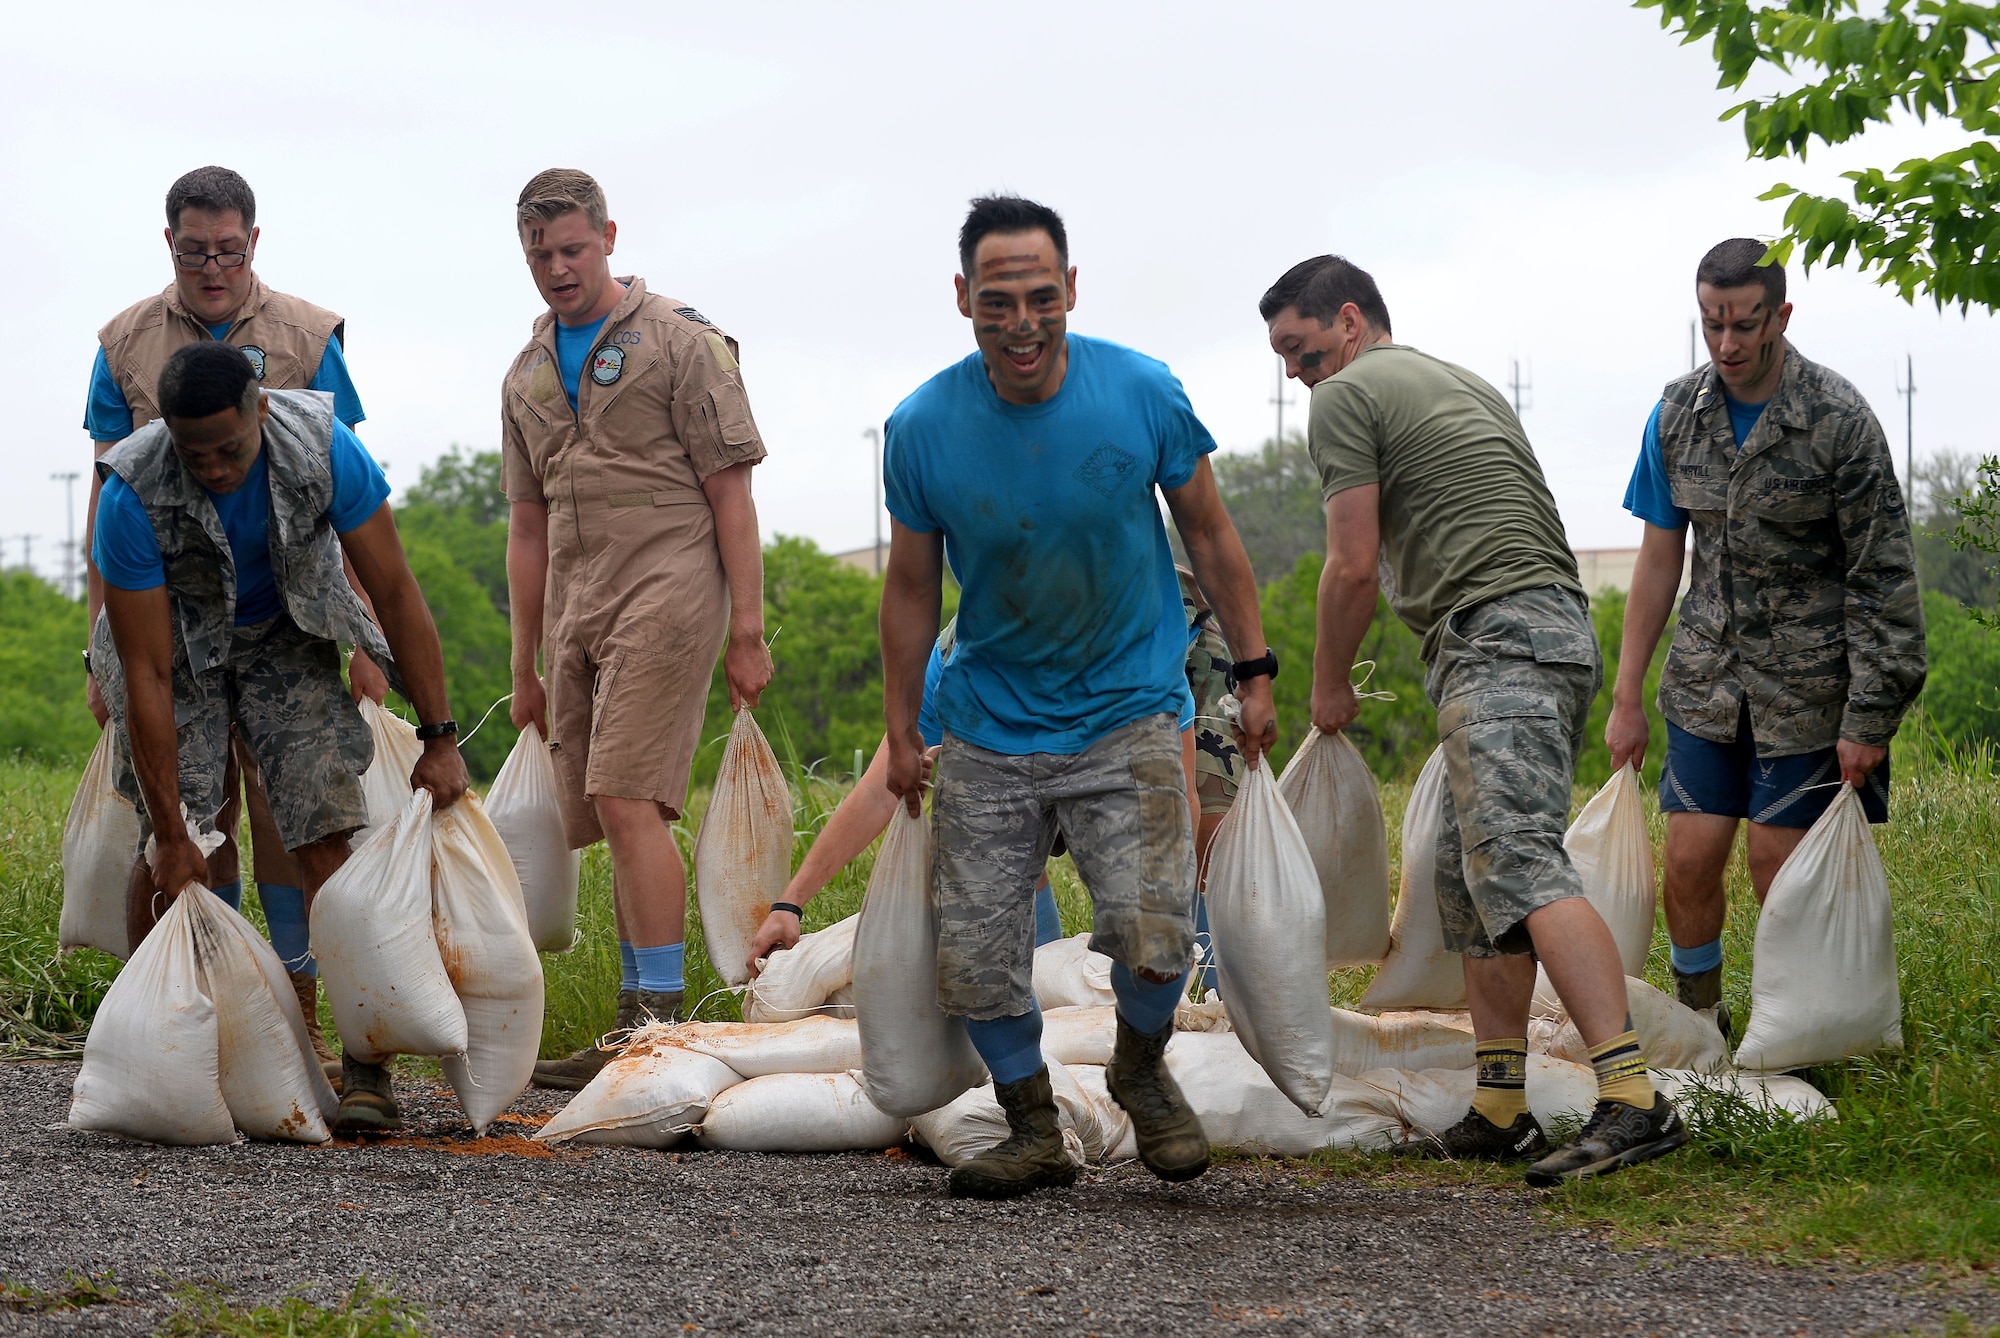 The 91st Cyberspace Operations Squadron “Demon Chasers” team builds a sandbag wall during the 67th Cyberspace Wing annual safety day “Gunslinger” warrior challenge at Joint Base San Antonio-Lackland, Texas, April 6, 2018. The challenge pitted several teams against one another in seven timed events, where the 68th Network Warfare Squadron “Purple Dragons” captured first place. (U.S. Air Force photo by Tech. Sgt. R.J. Biermann)